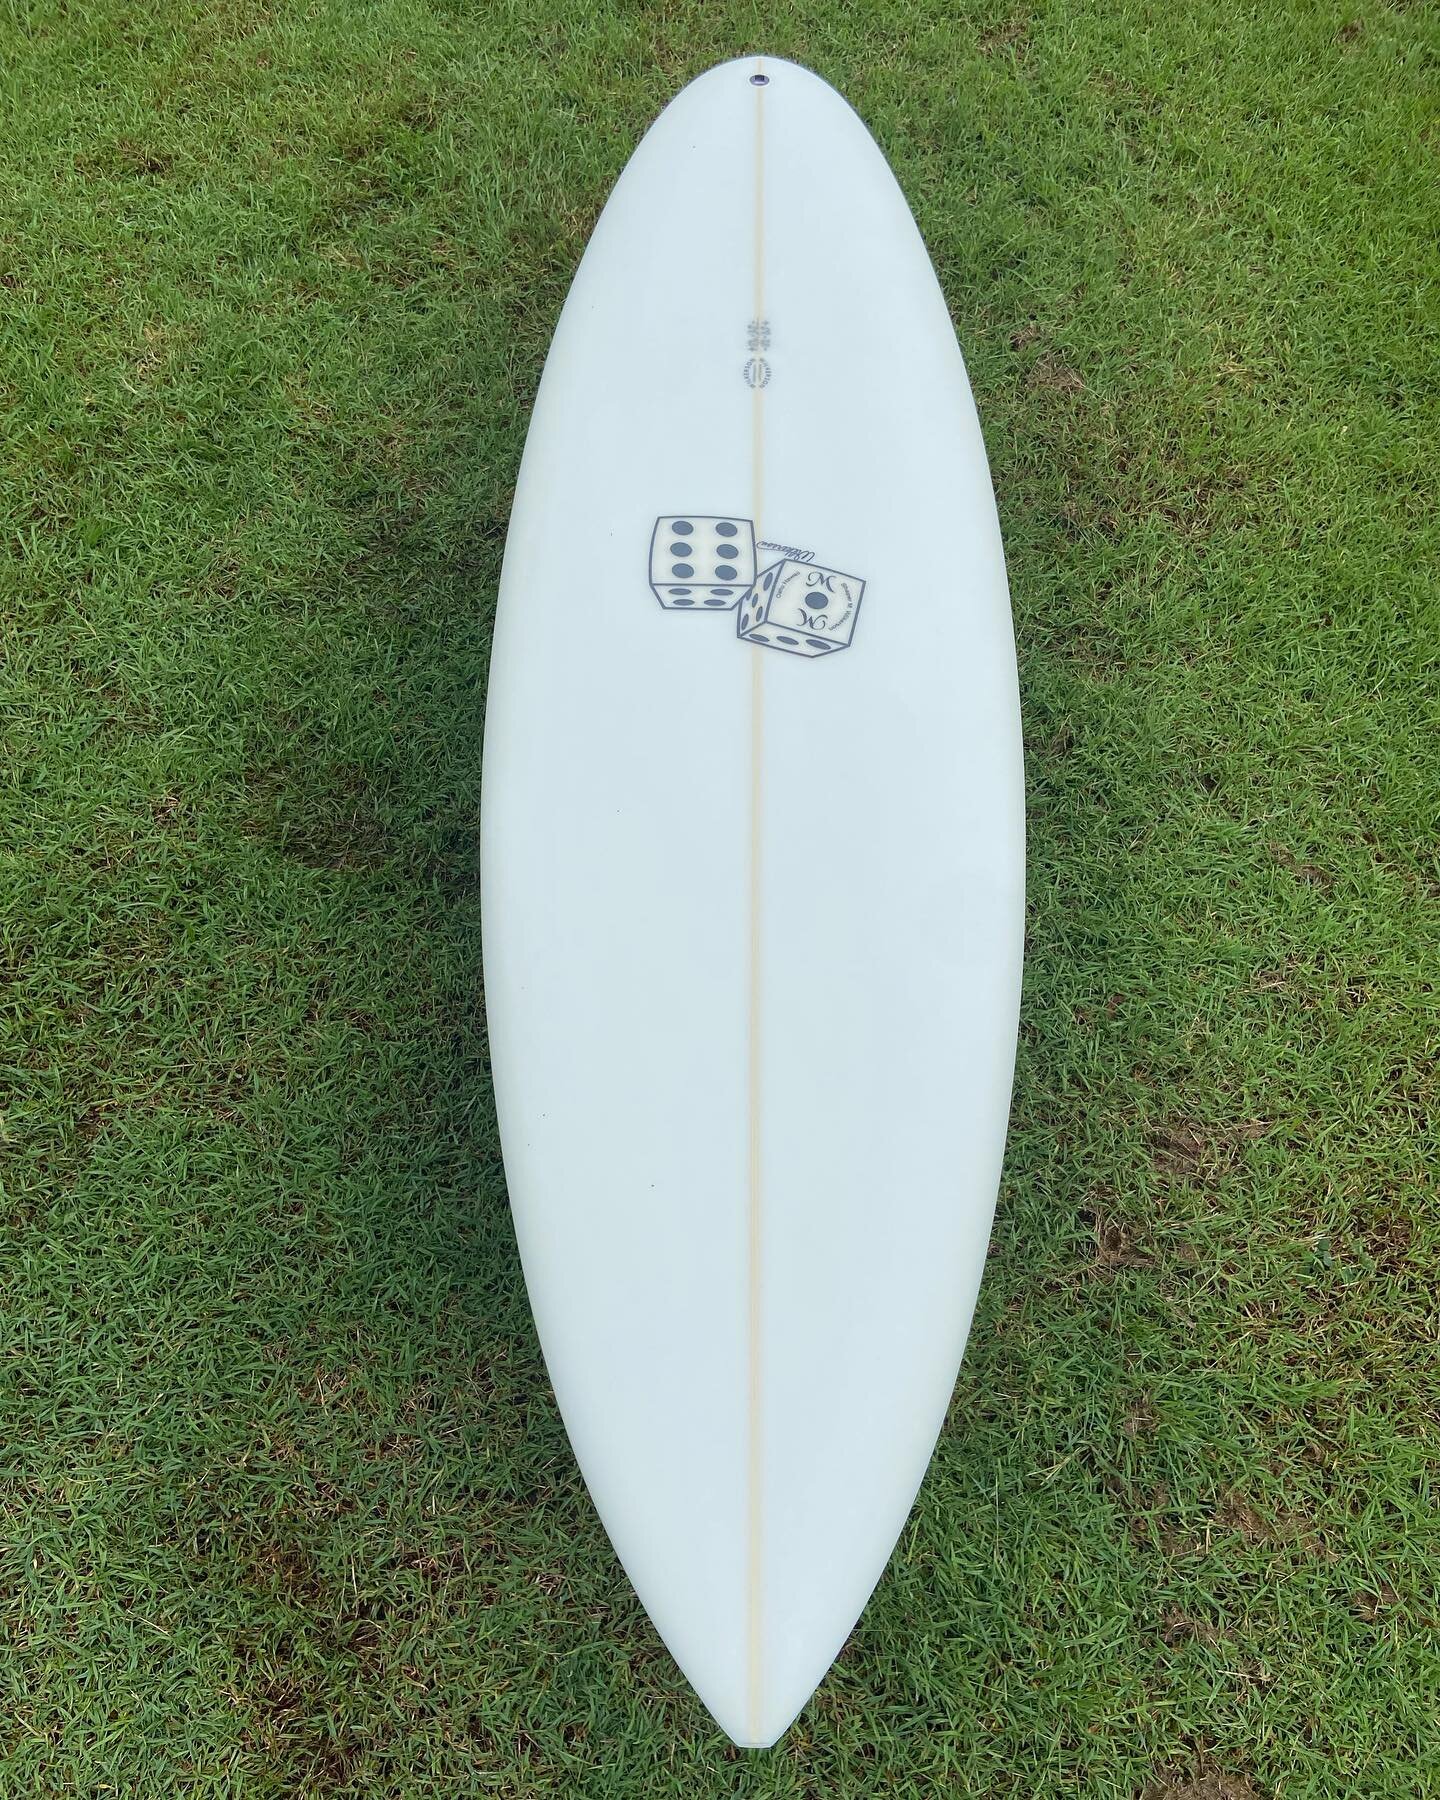 5&rsquo;11&rdquo;&bull;19 &frac12; &bull; 2 5/16 &bull; #custom #handshape for @jnoaky  This board features a wider shortboard outline in the nose, deep single concave bottom with slight double concave inside thru the fin area, future fin system, sin